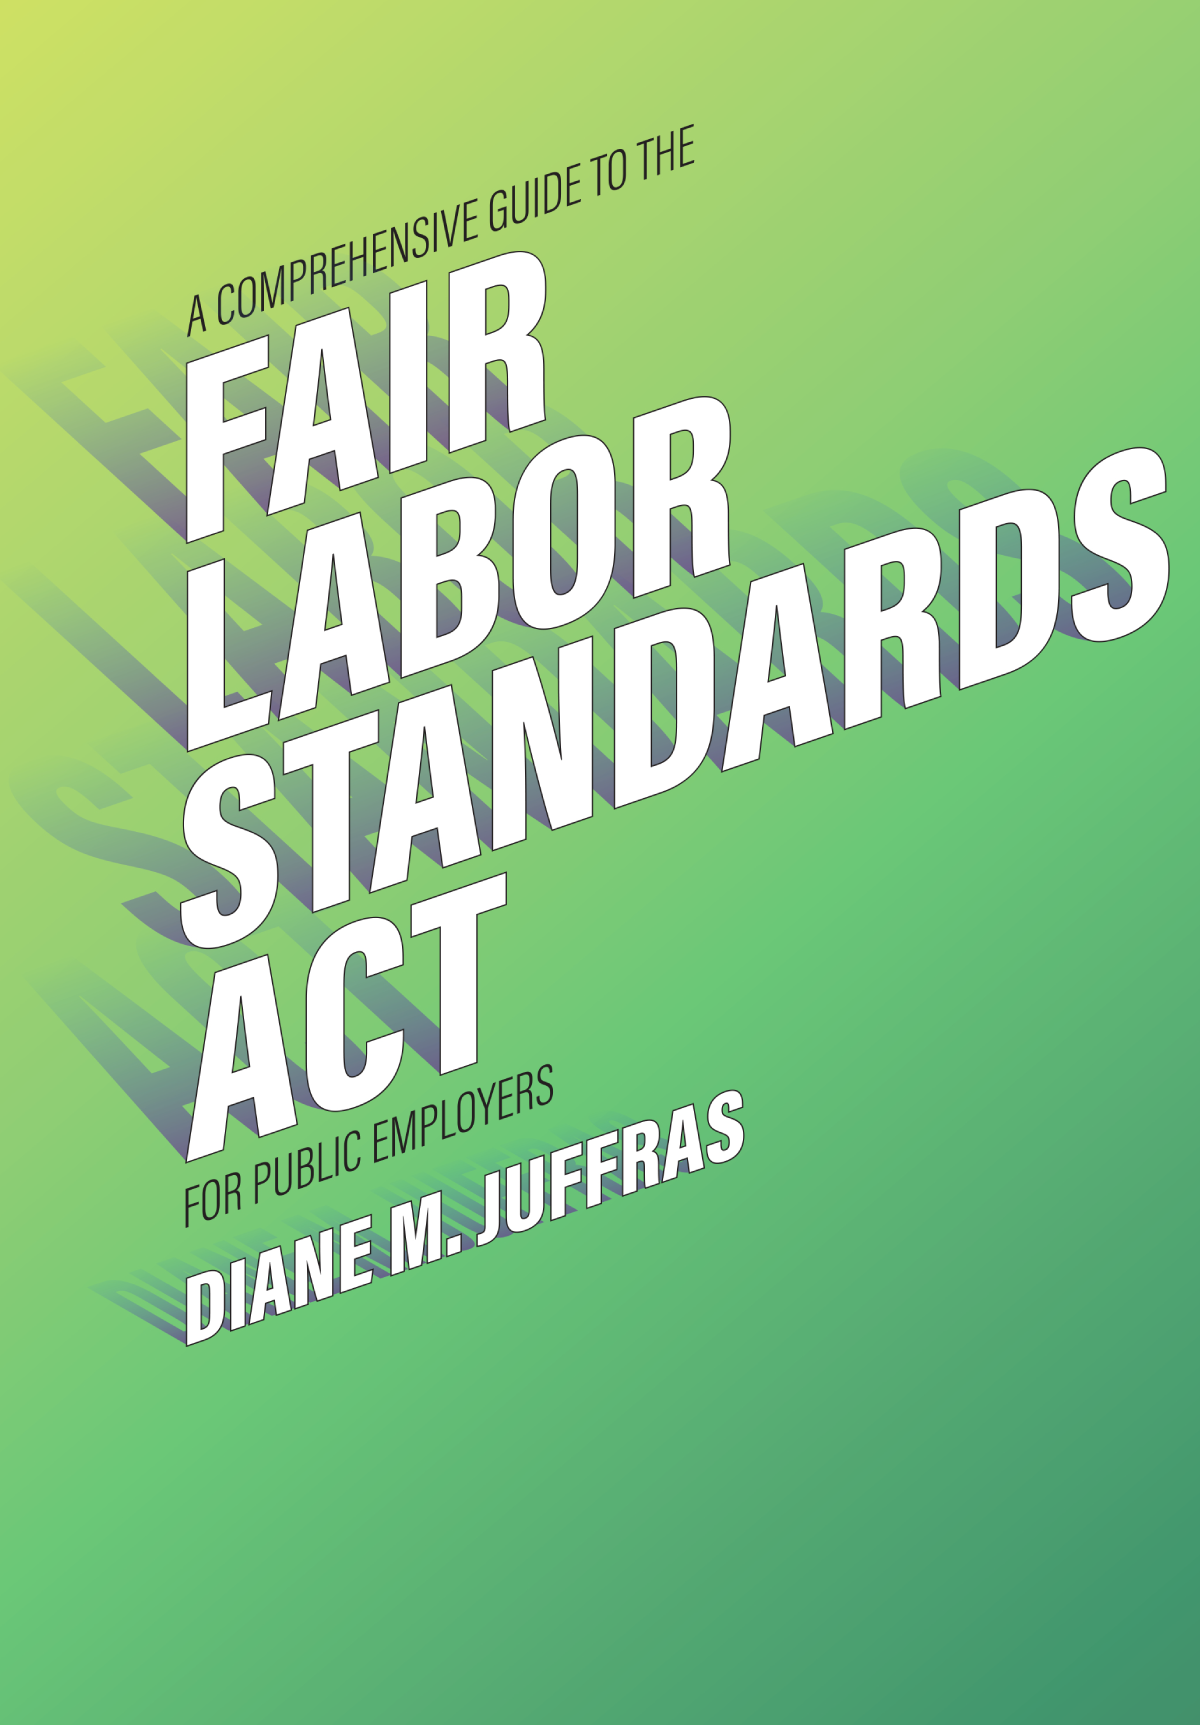 Cover image for A Comprehensive Guide to the Fair Labor Standards Act for Public Employers